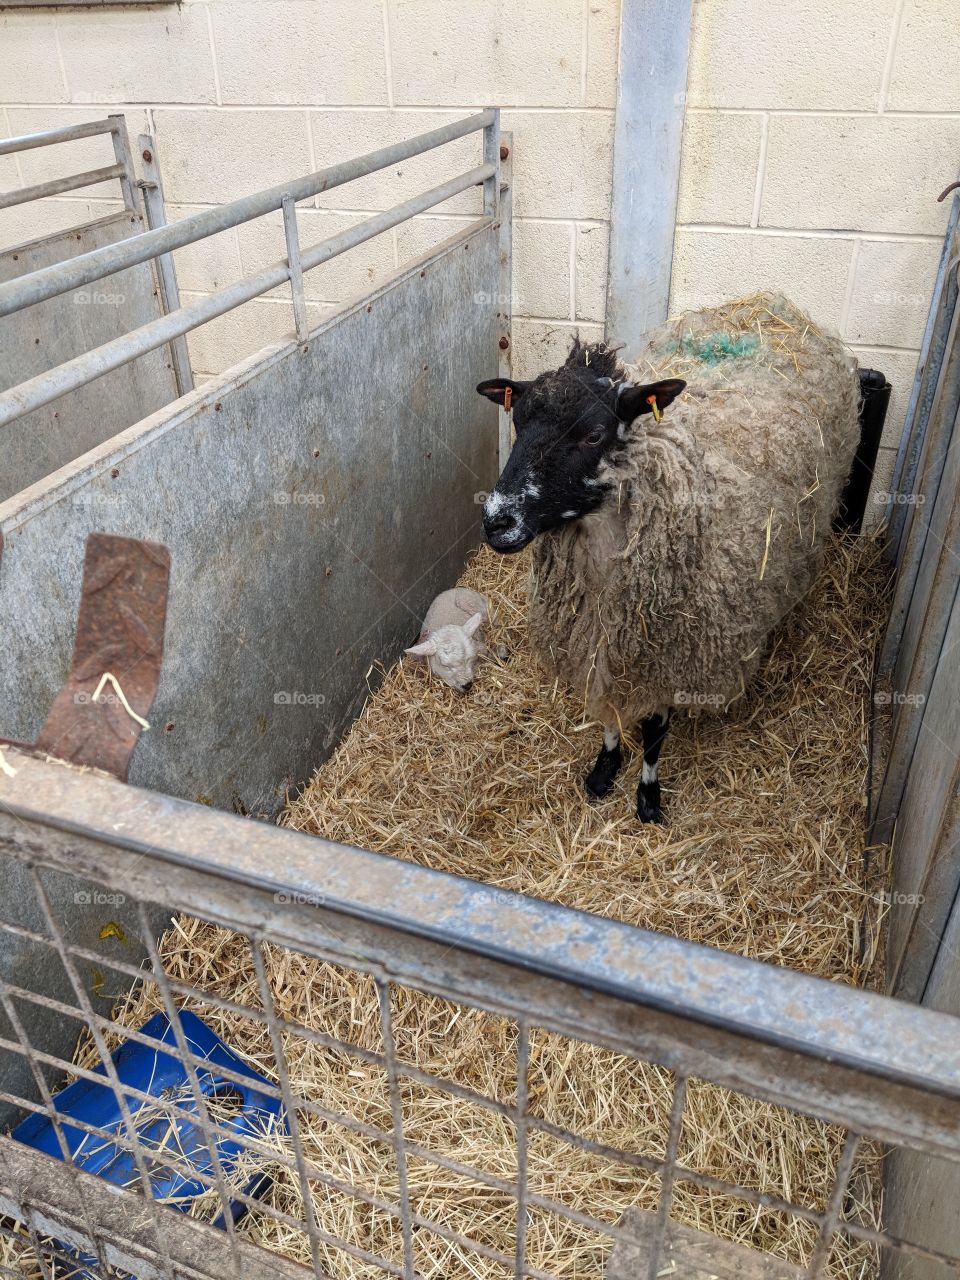 Mother sheep and lamb in pen